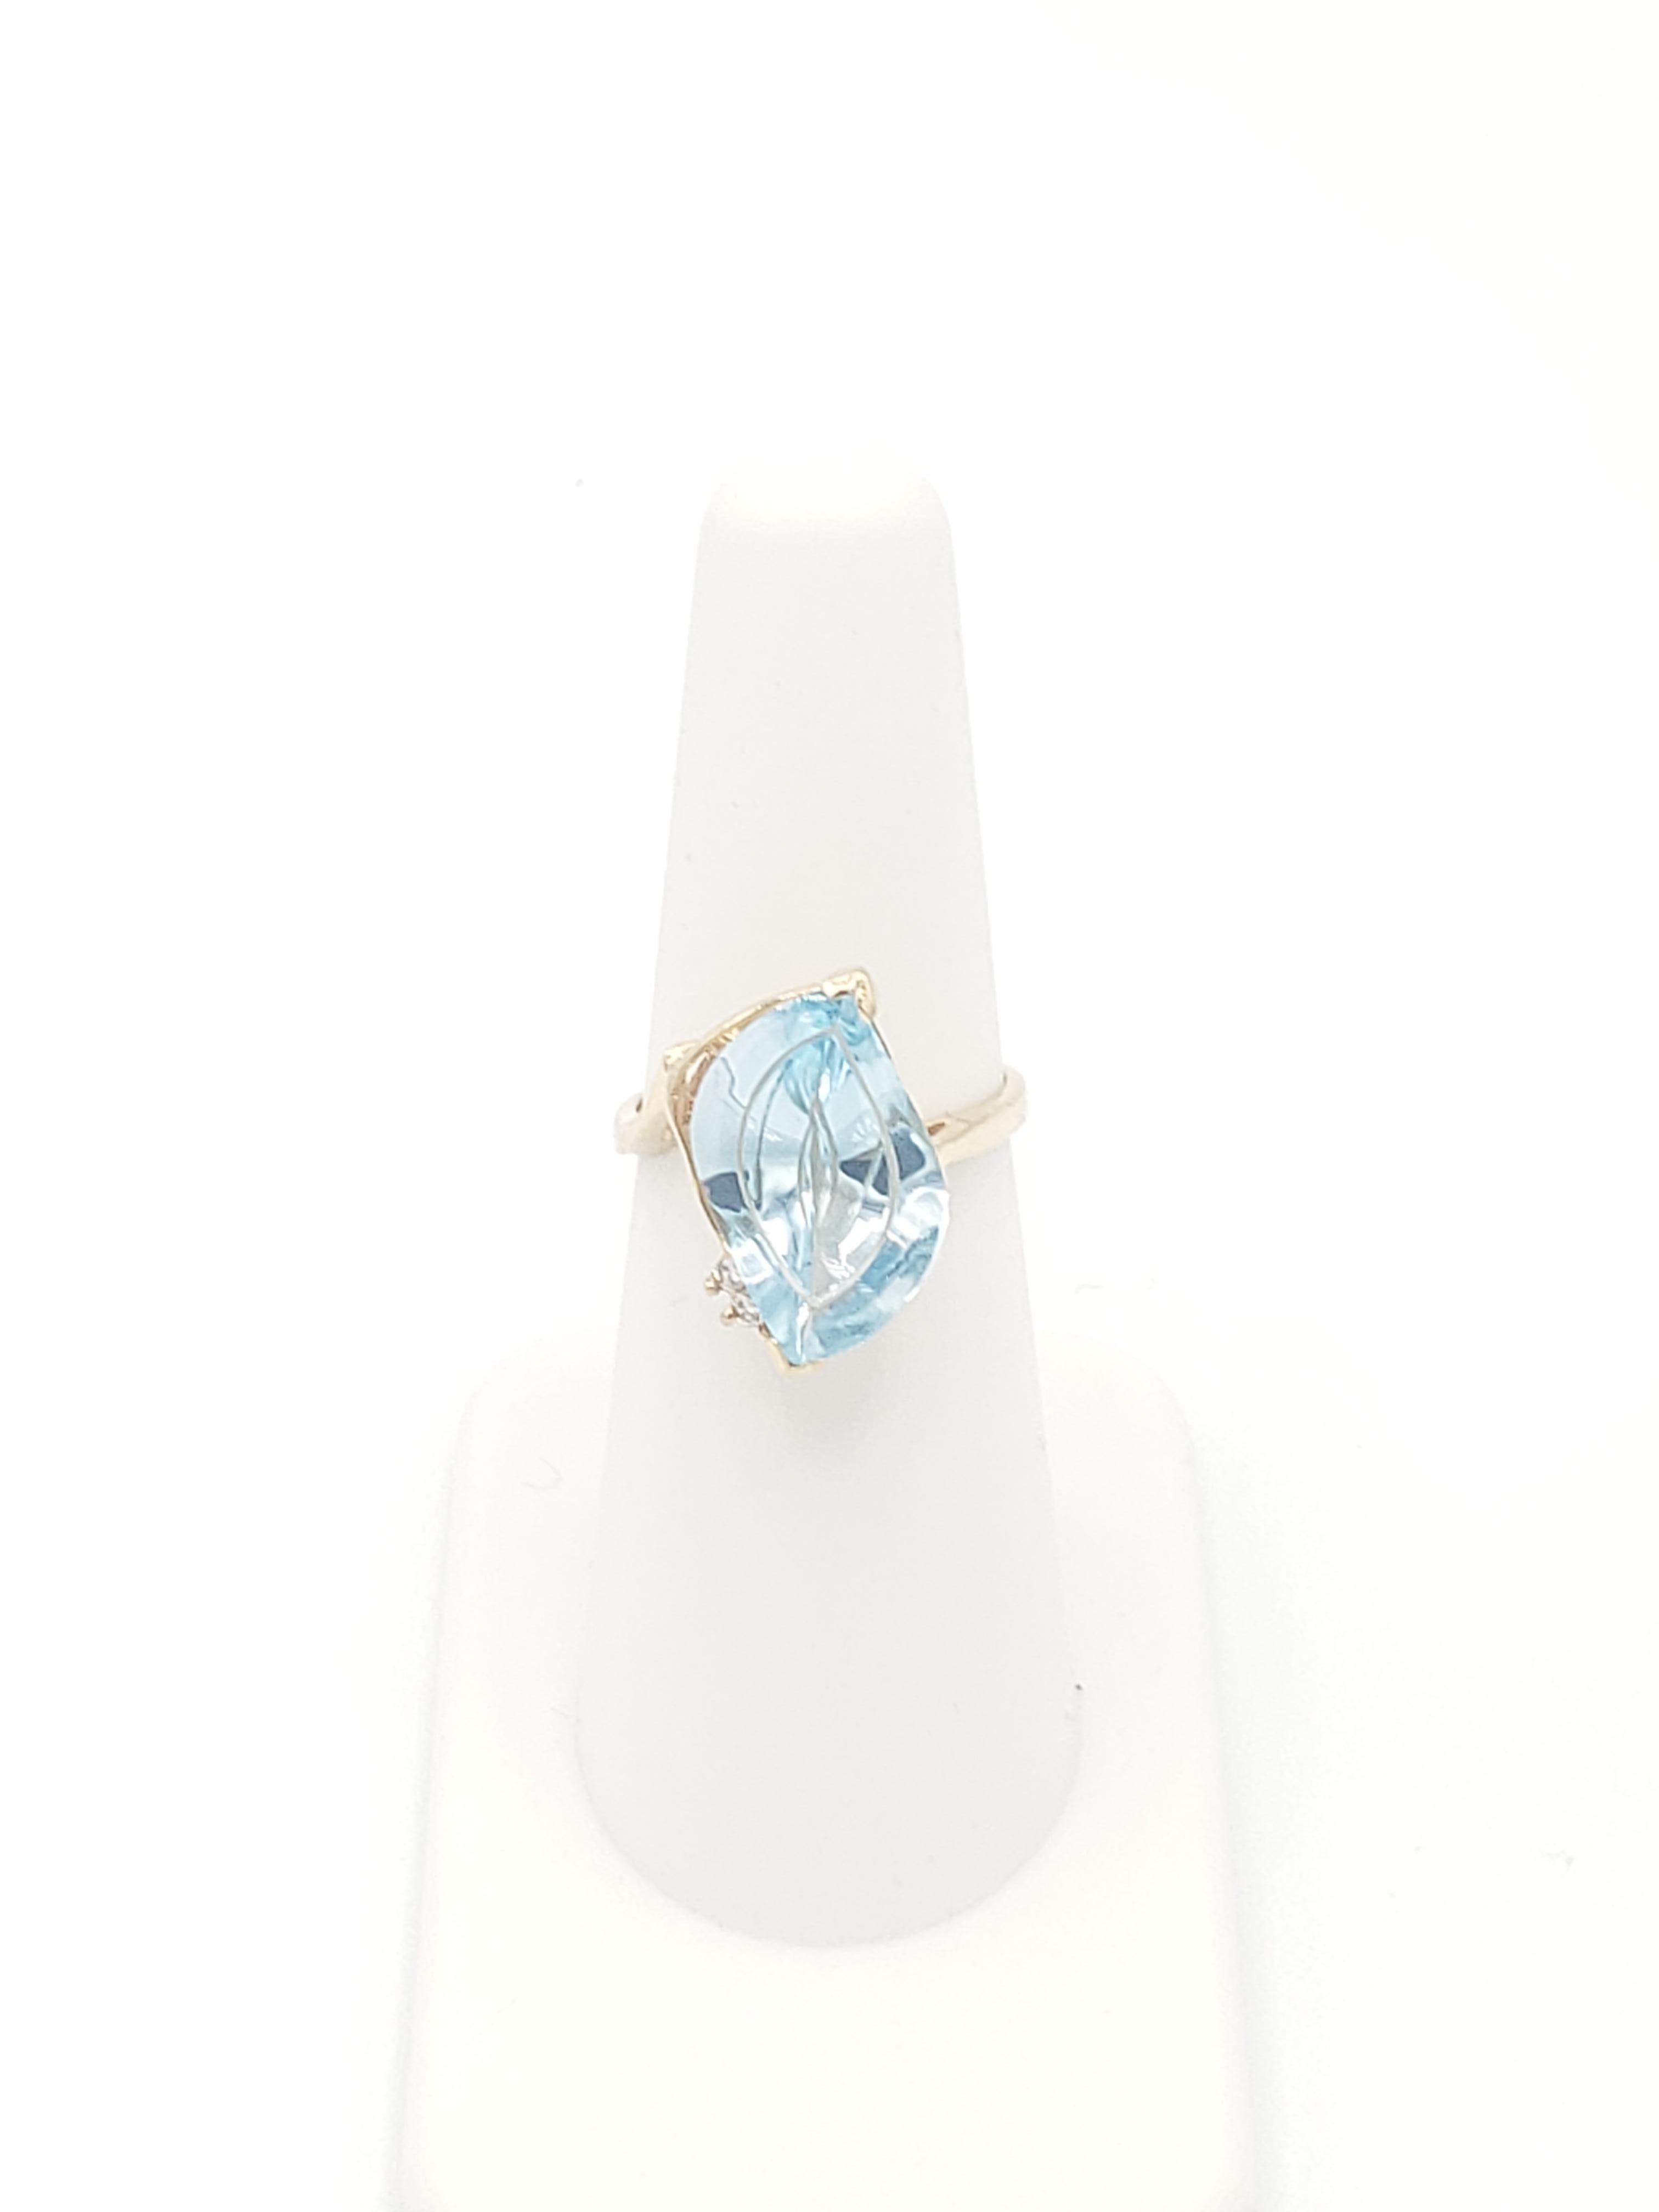 This stunning Fantasy Cut ring features a 5 carat natural sky blue topaz stone set in a solid 14K yellow gold band. The ring is designed in an antique crown style, with white diamond accents and a total carat weight of 19.45 ct. The ring is brand